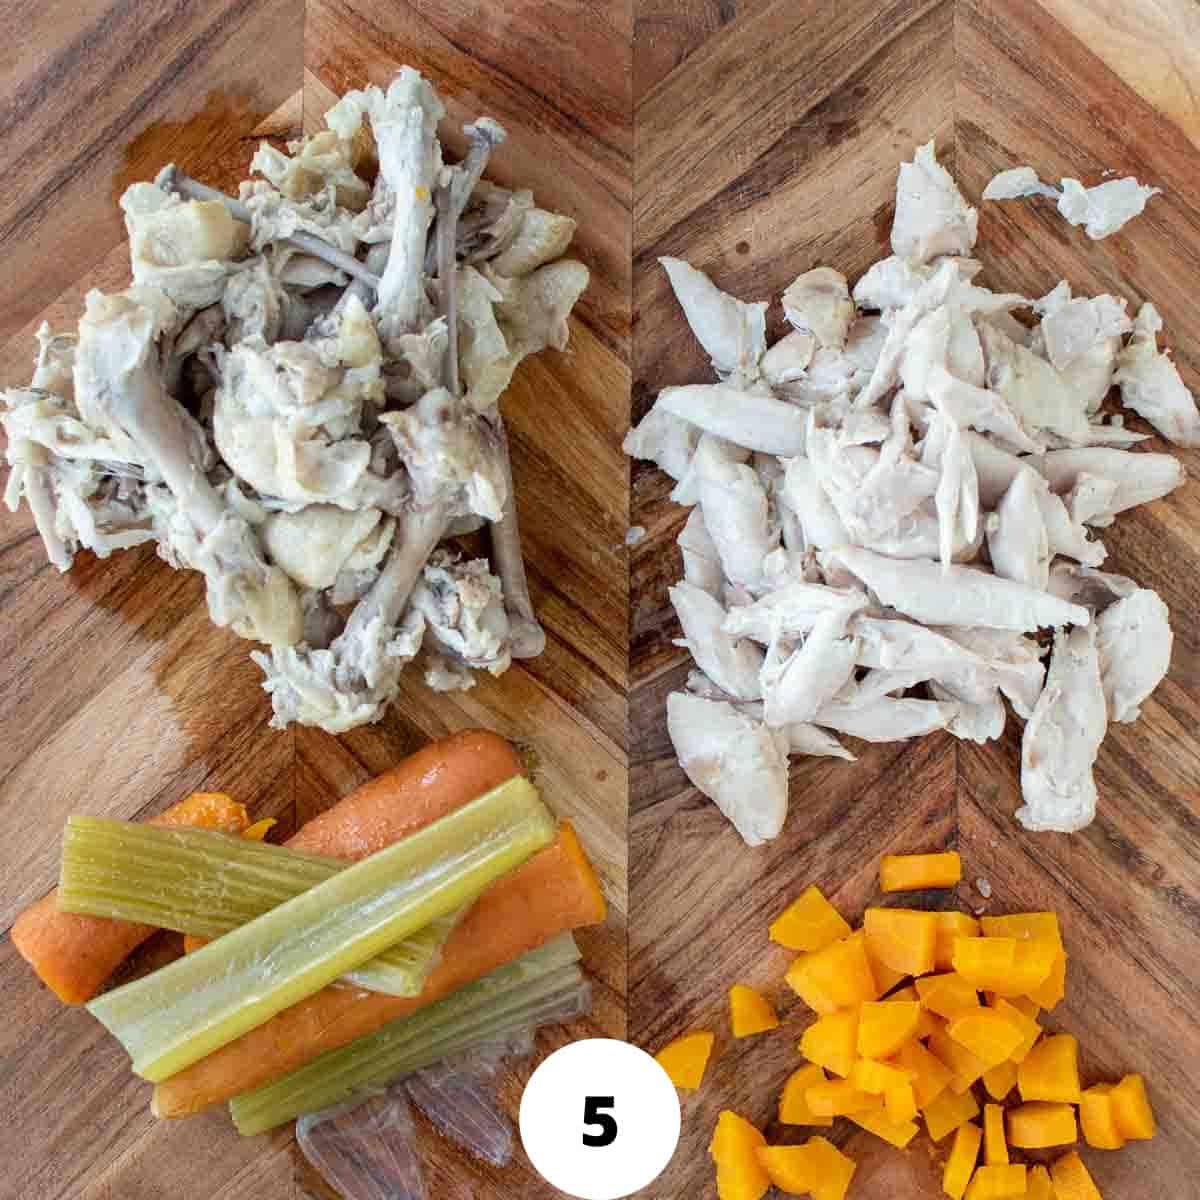 Pile of shredded chicken, pile of chicken bones and skin, pile of cooked celery and carrot, pile of diced carrot.